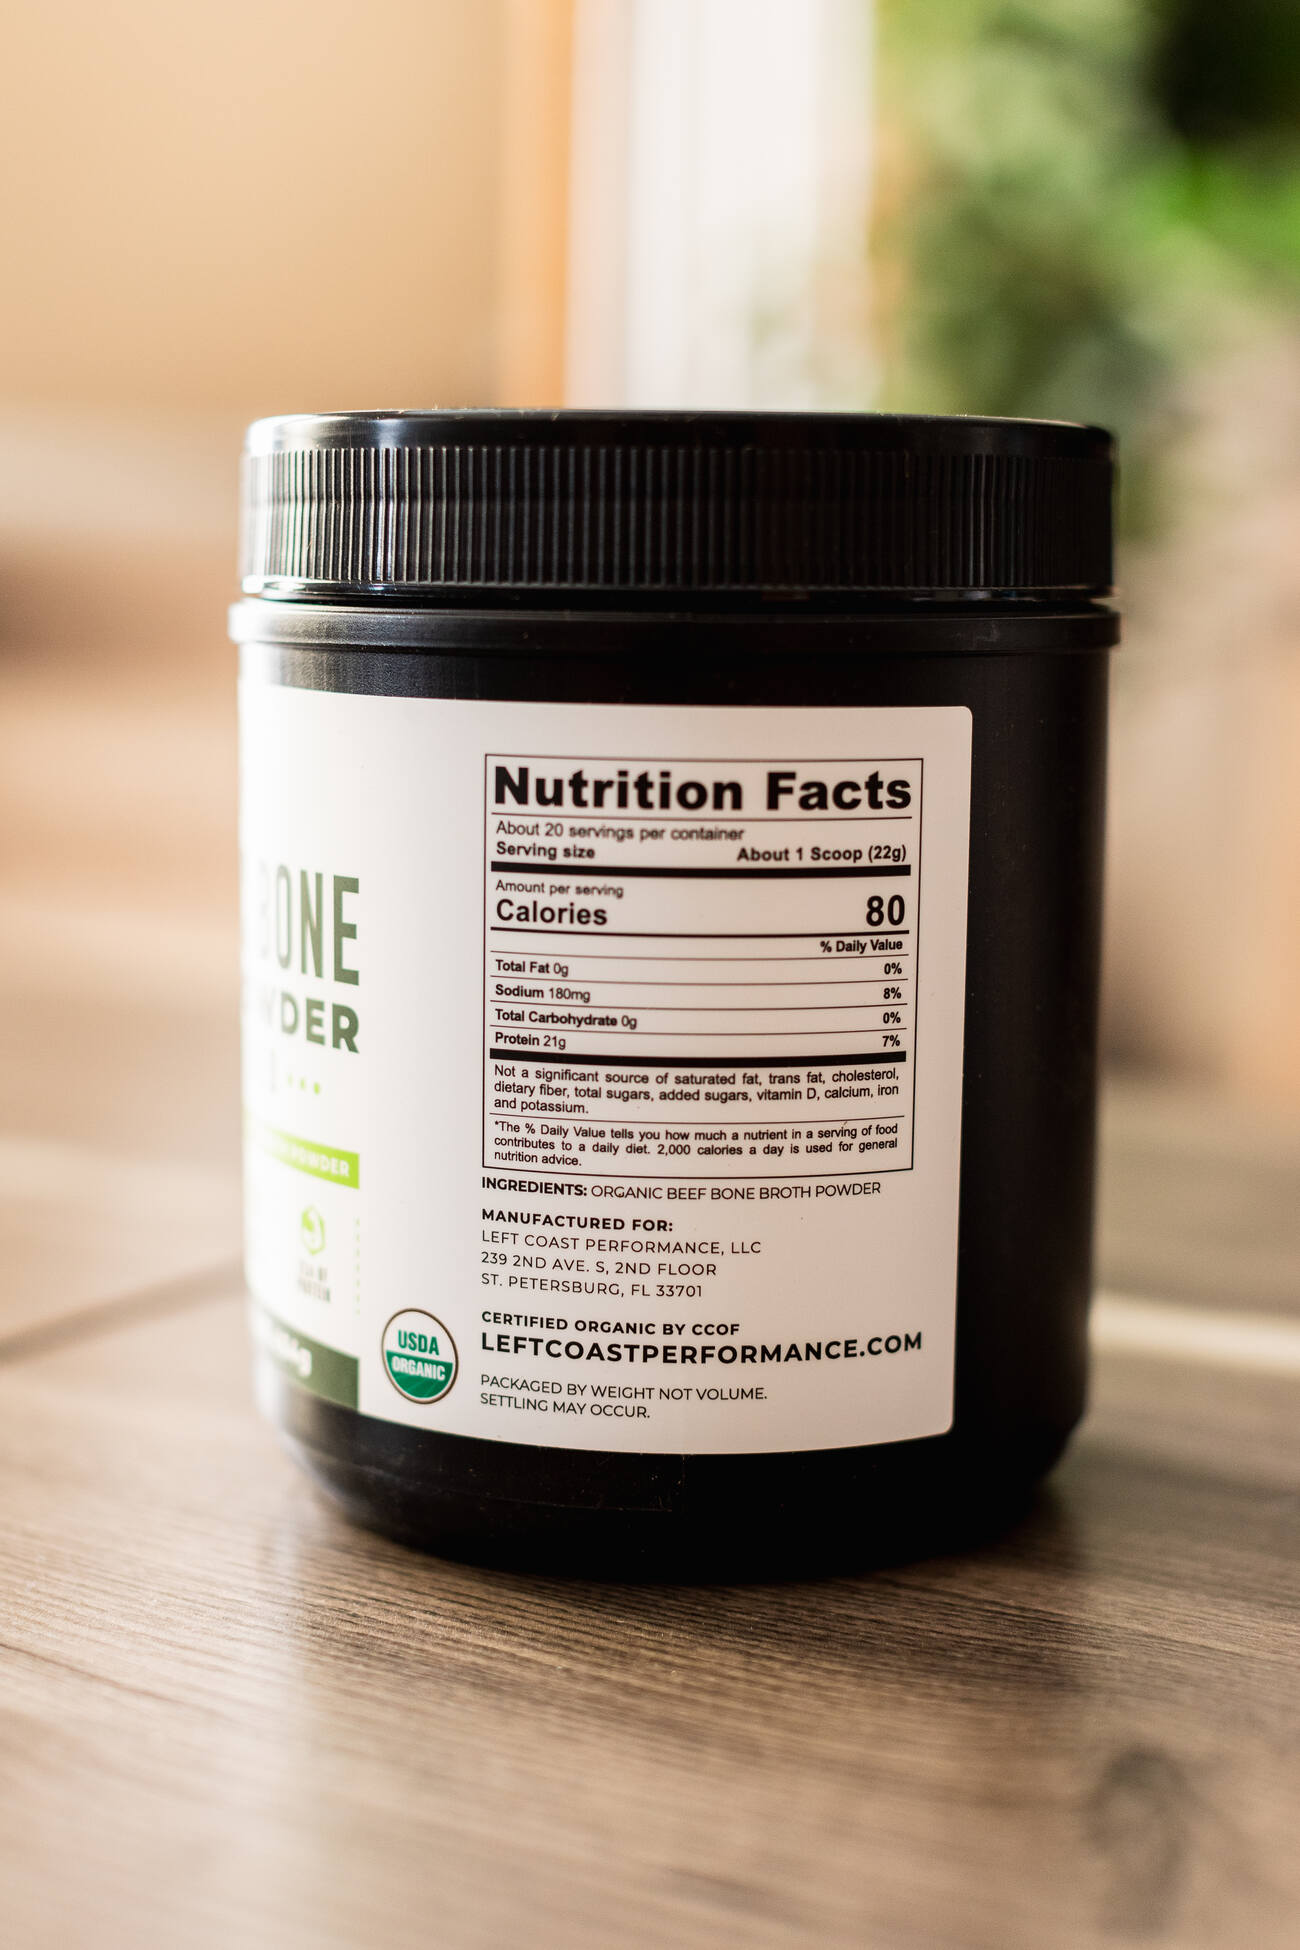 A container of "ONE PROTEIN" powder with nutritional facts on the label